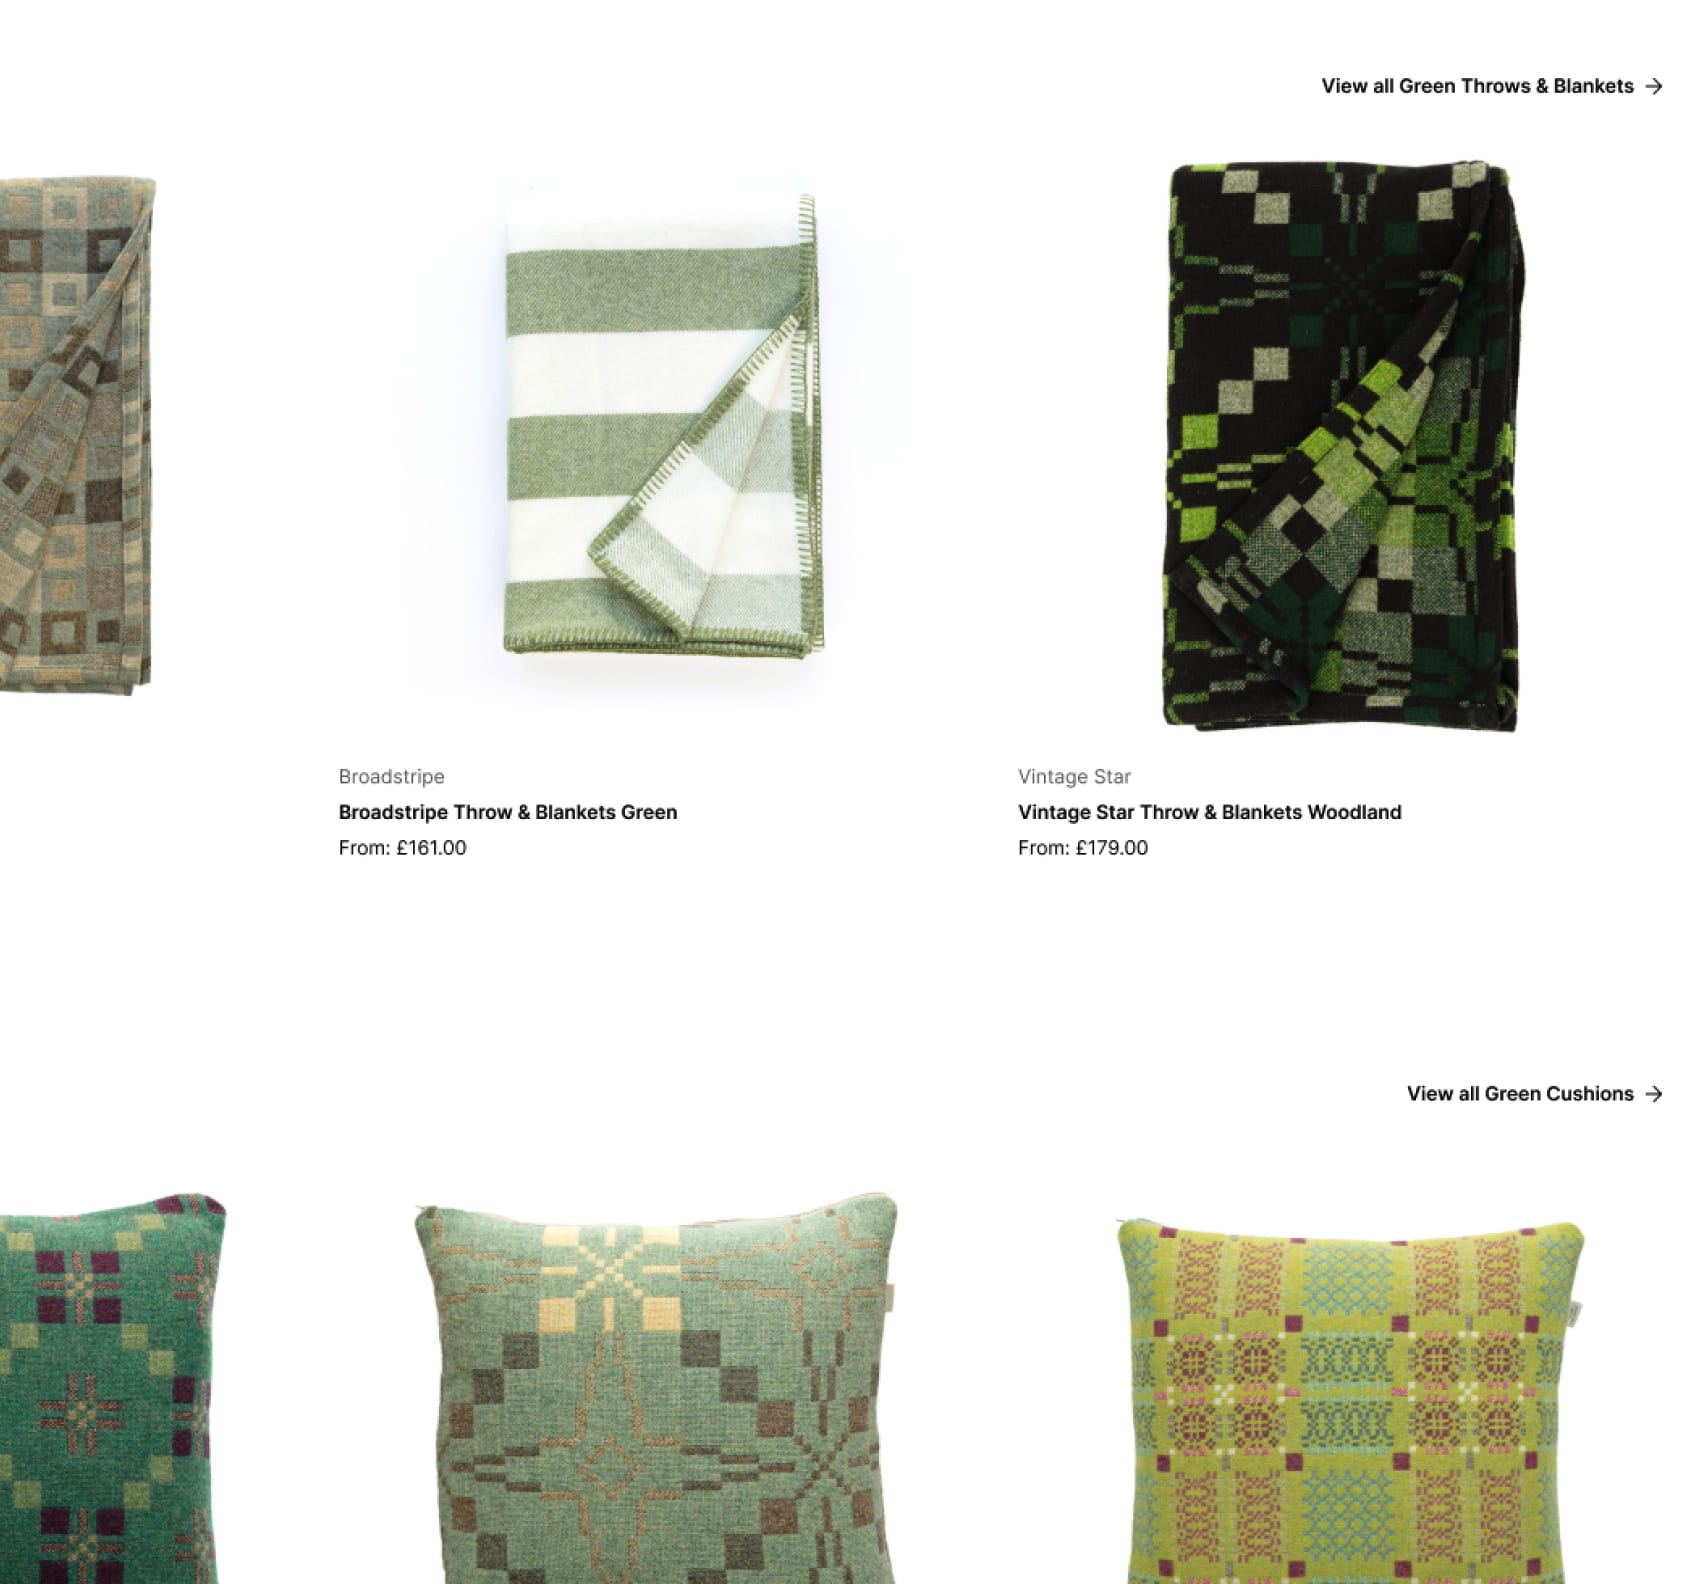 Green throws and cushions